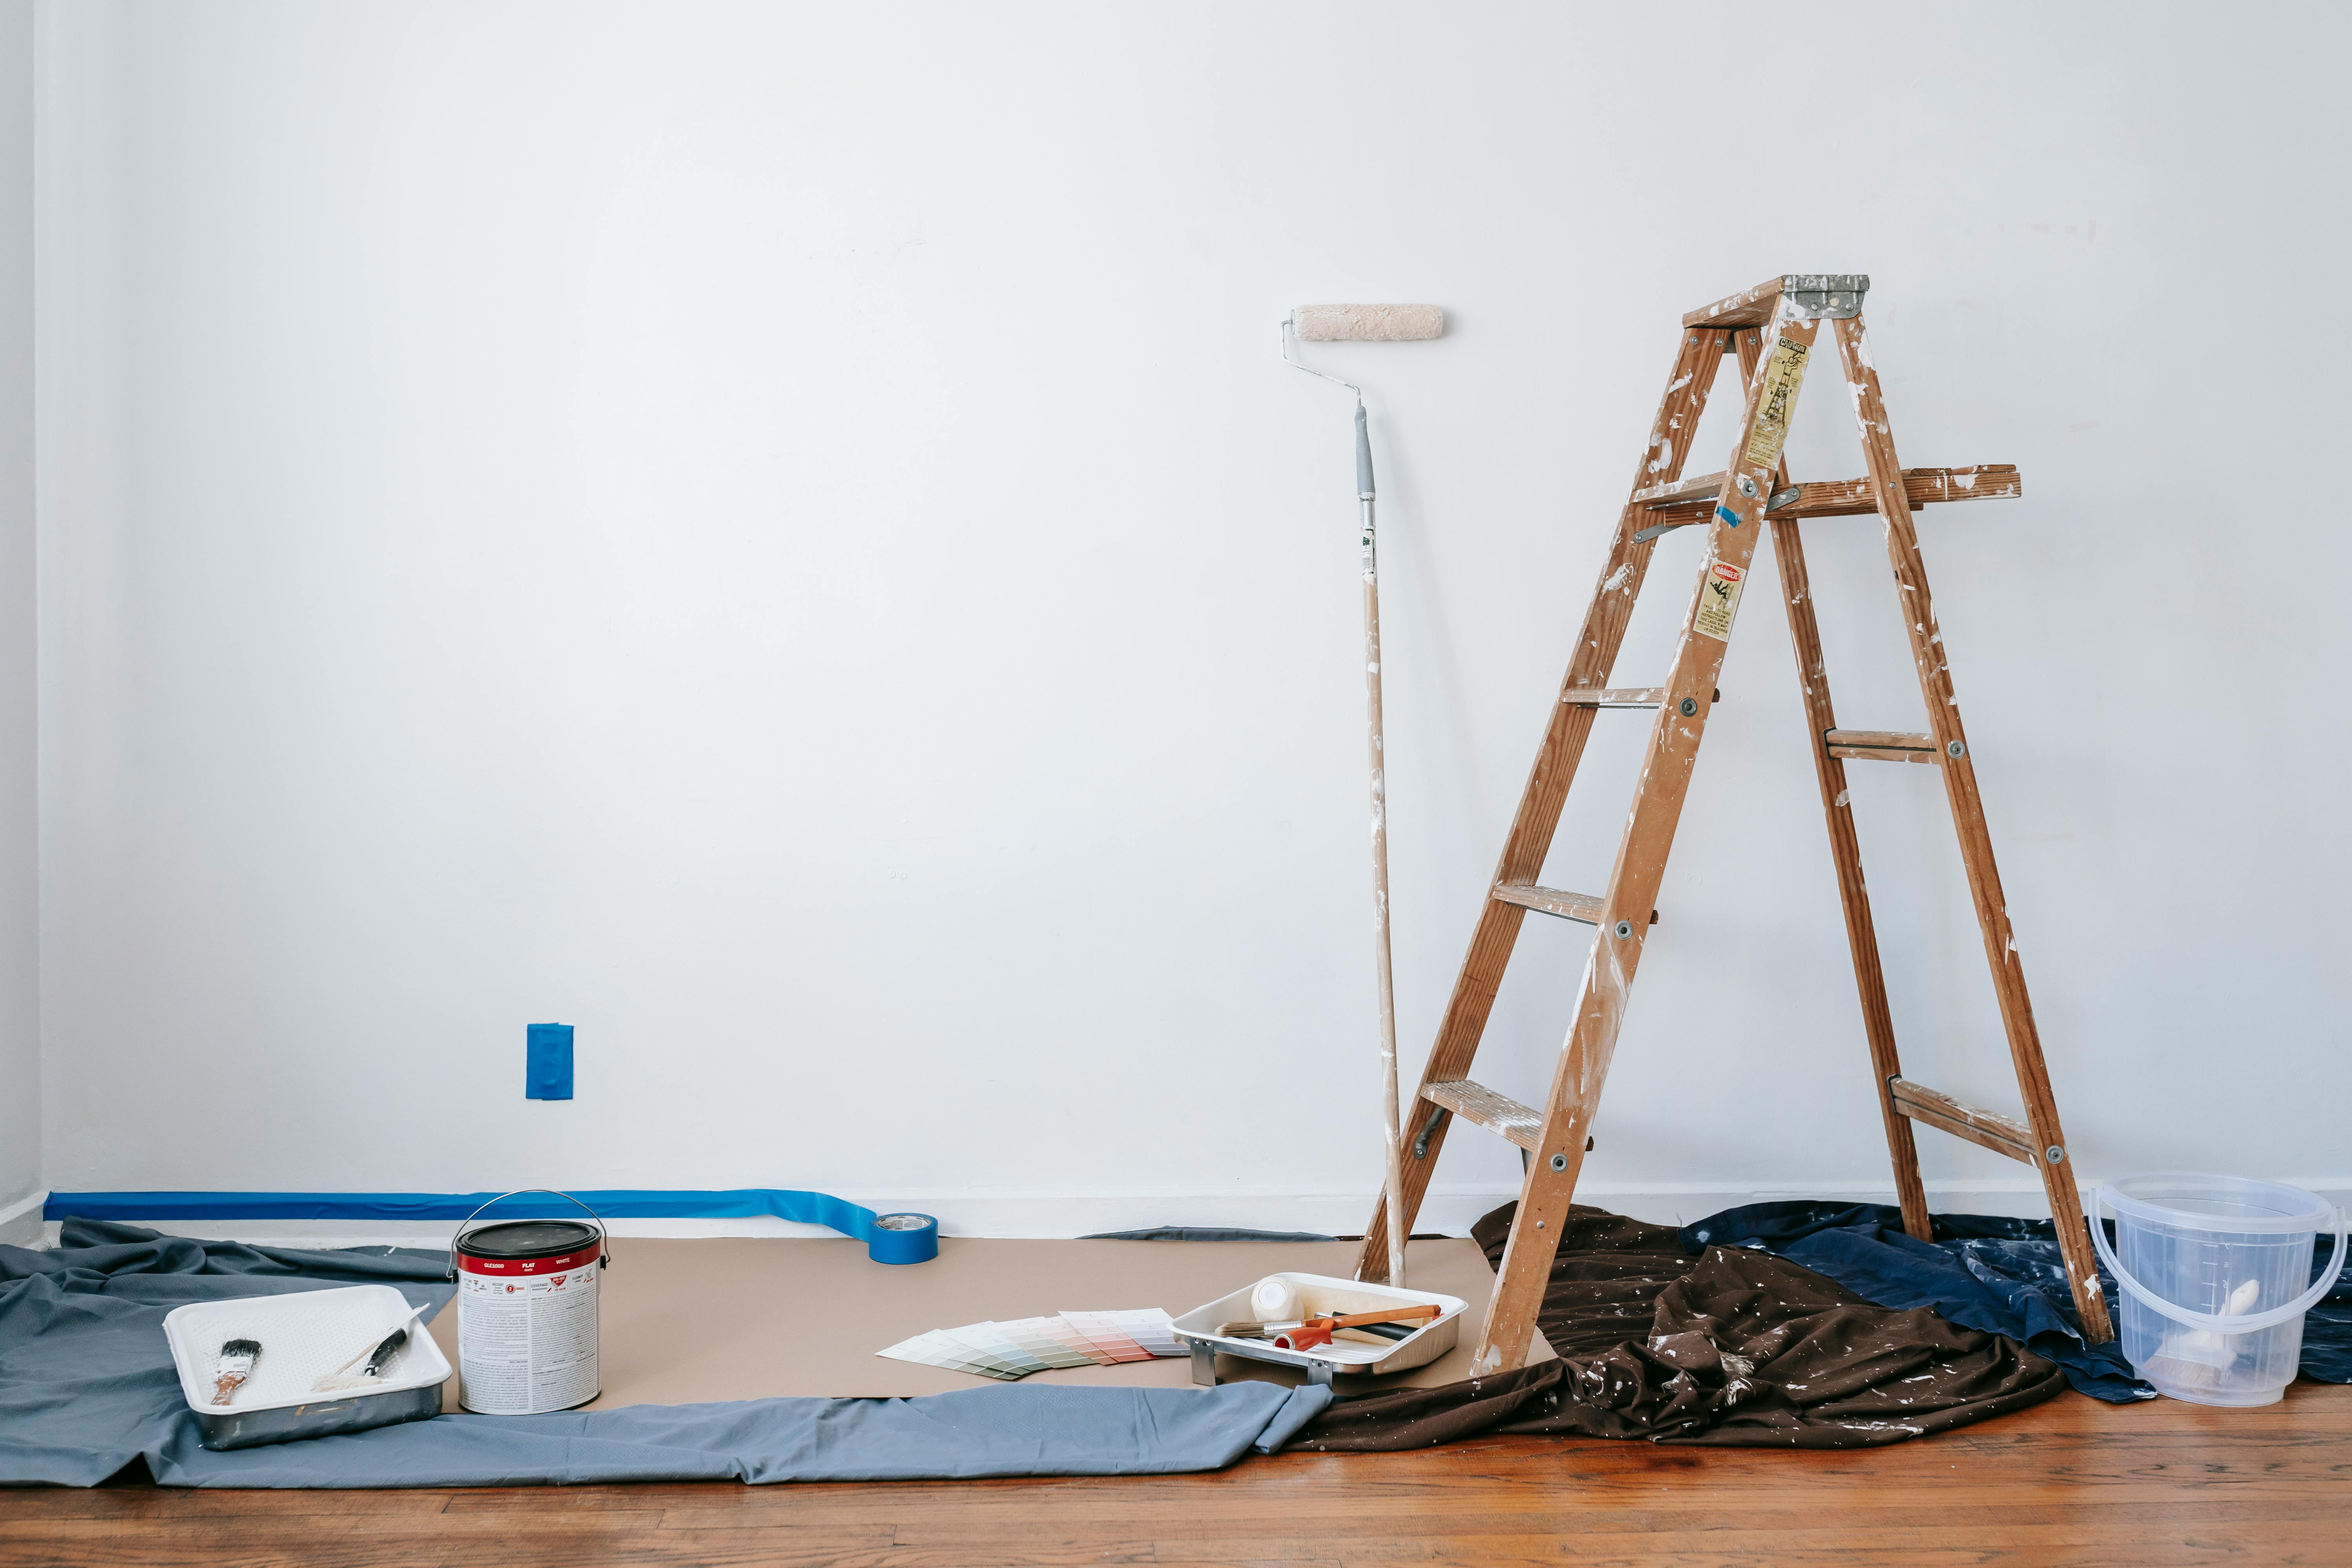 Renovations in a house | Source: Pexels